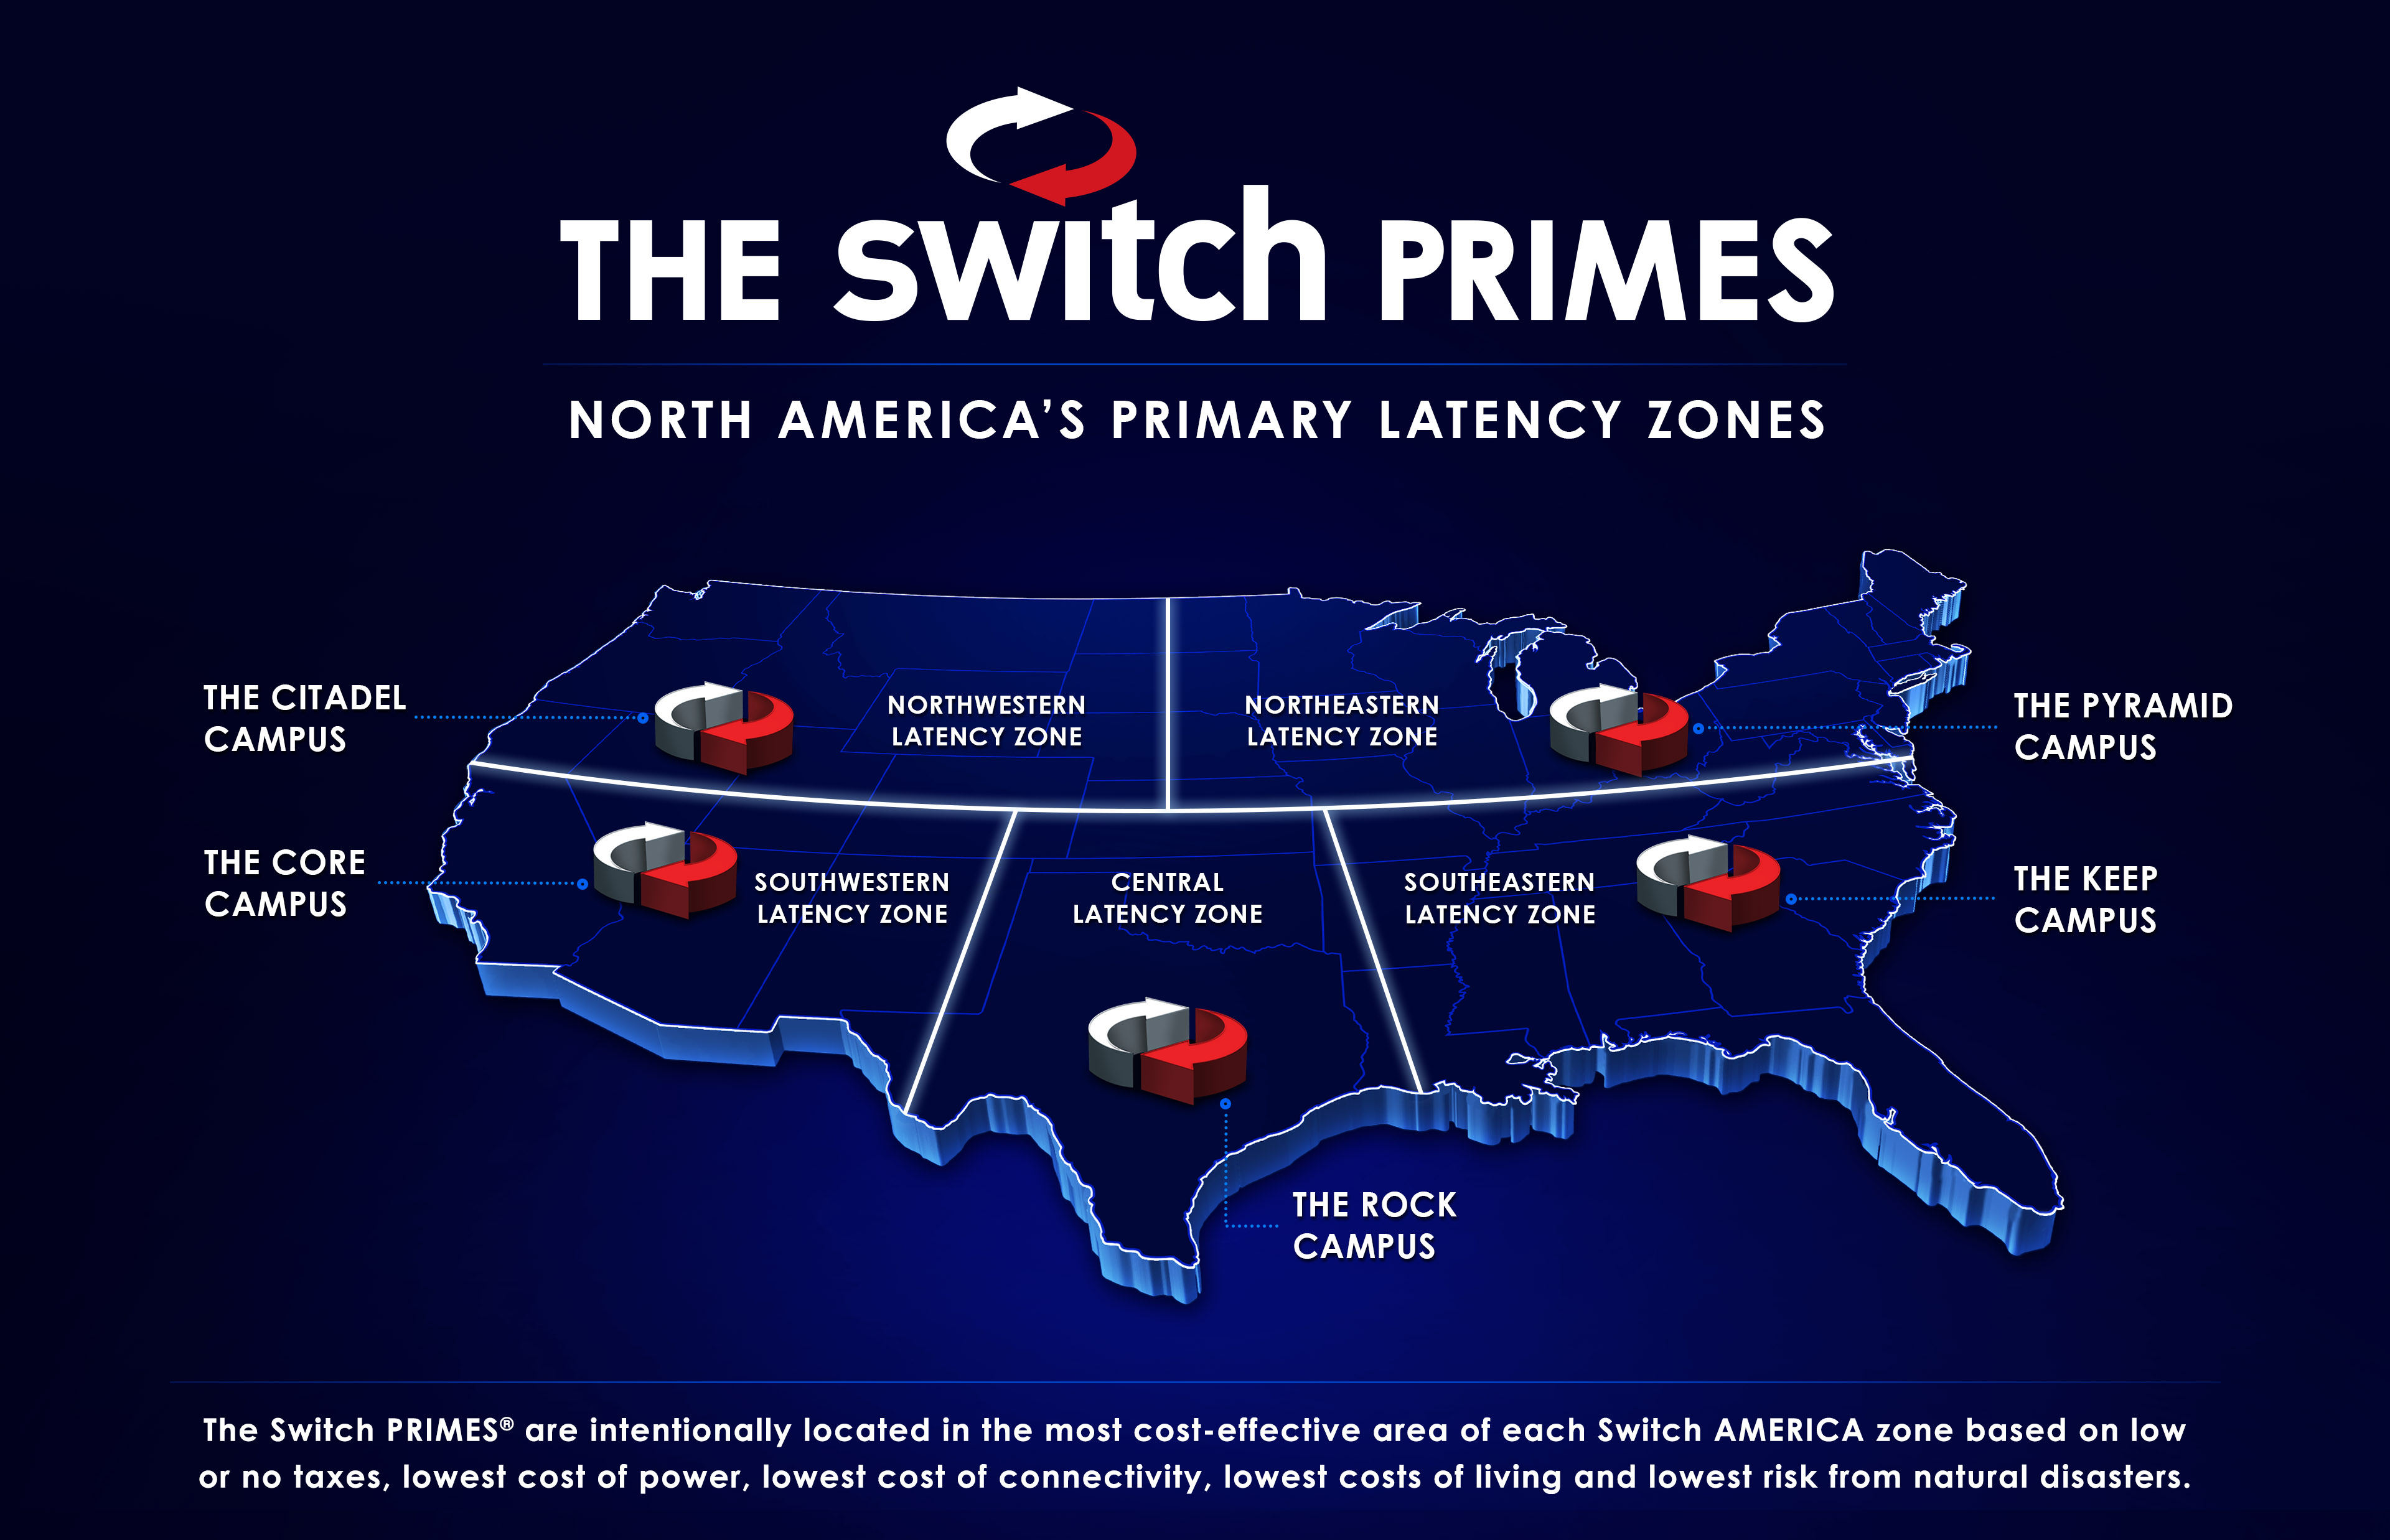 THE FIVE SWITCH PRIMES